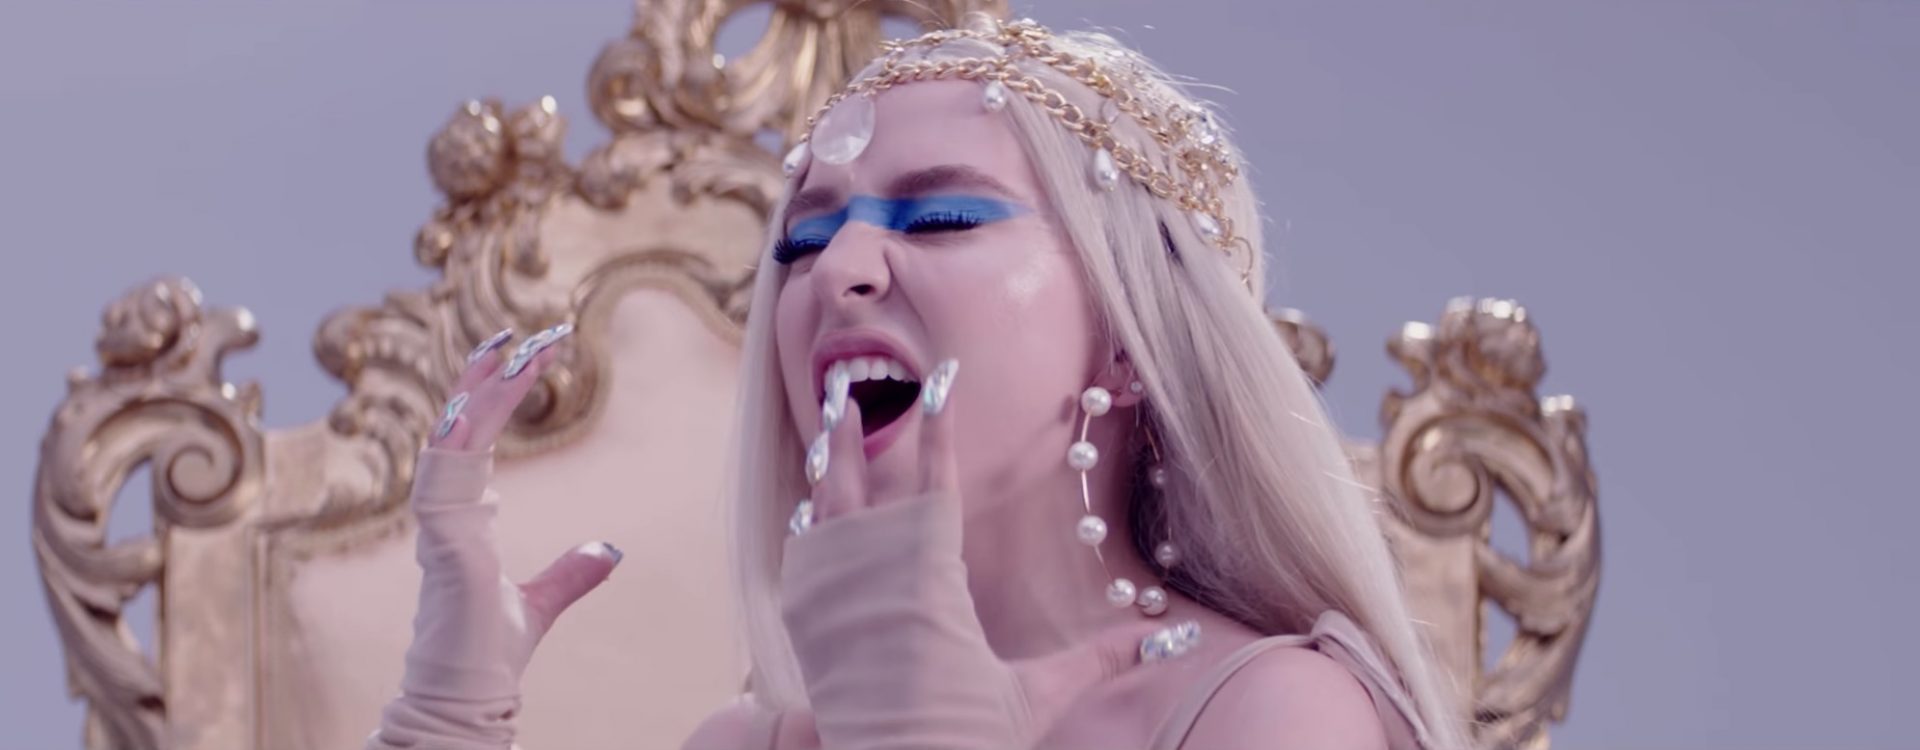 Ava Max Releases Kings Queens Pt 2 Featuring Lauv And Saweetie Movin 92 5.